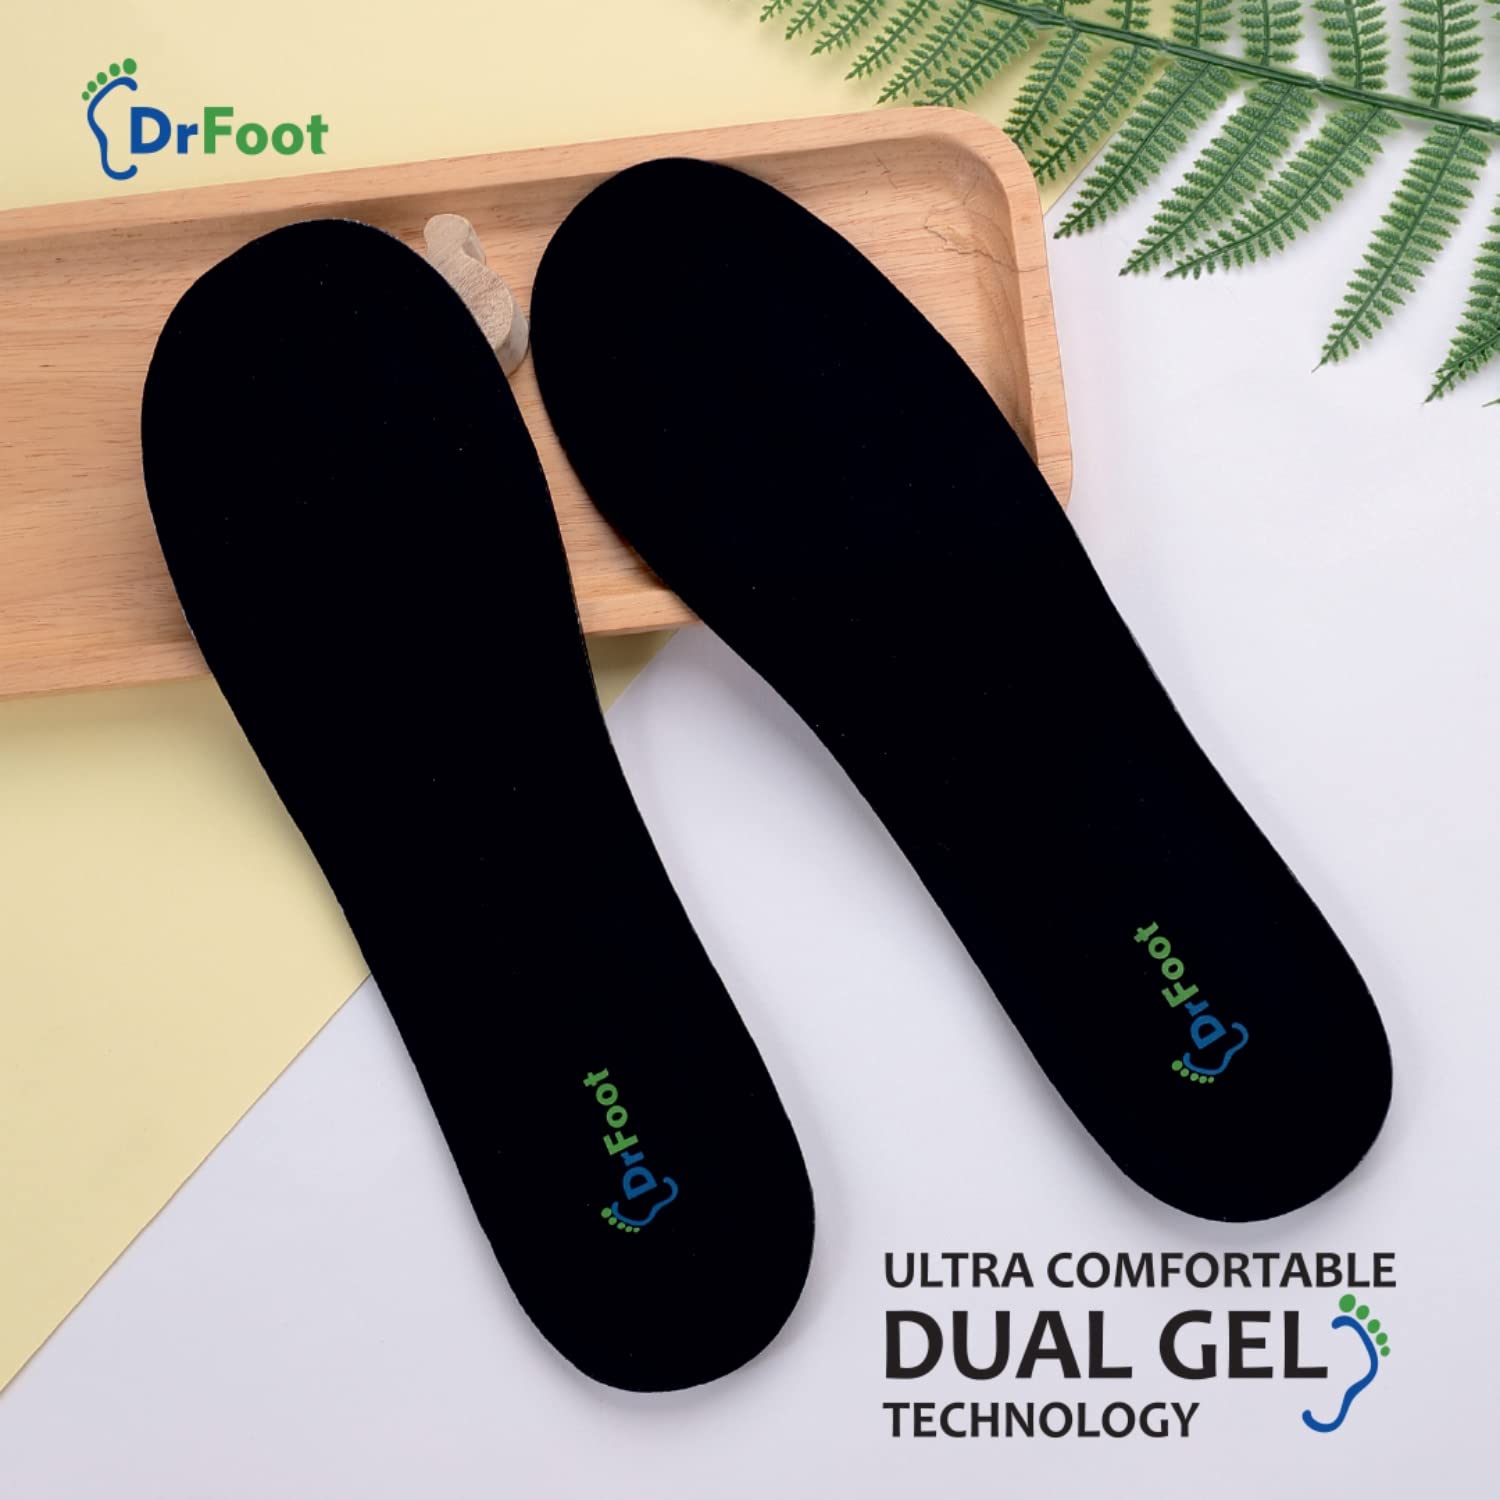 Dr Foot Dual Gel Insoles Anti-Microbial | For Walking, Running, Hiking & Regular Use | All Day Ultra Comfrort & Support & Shock Absorption With Dual Gel Technology | For Men – 1 Pair (Pack of 10)